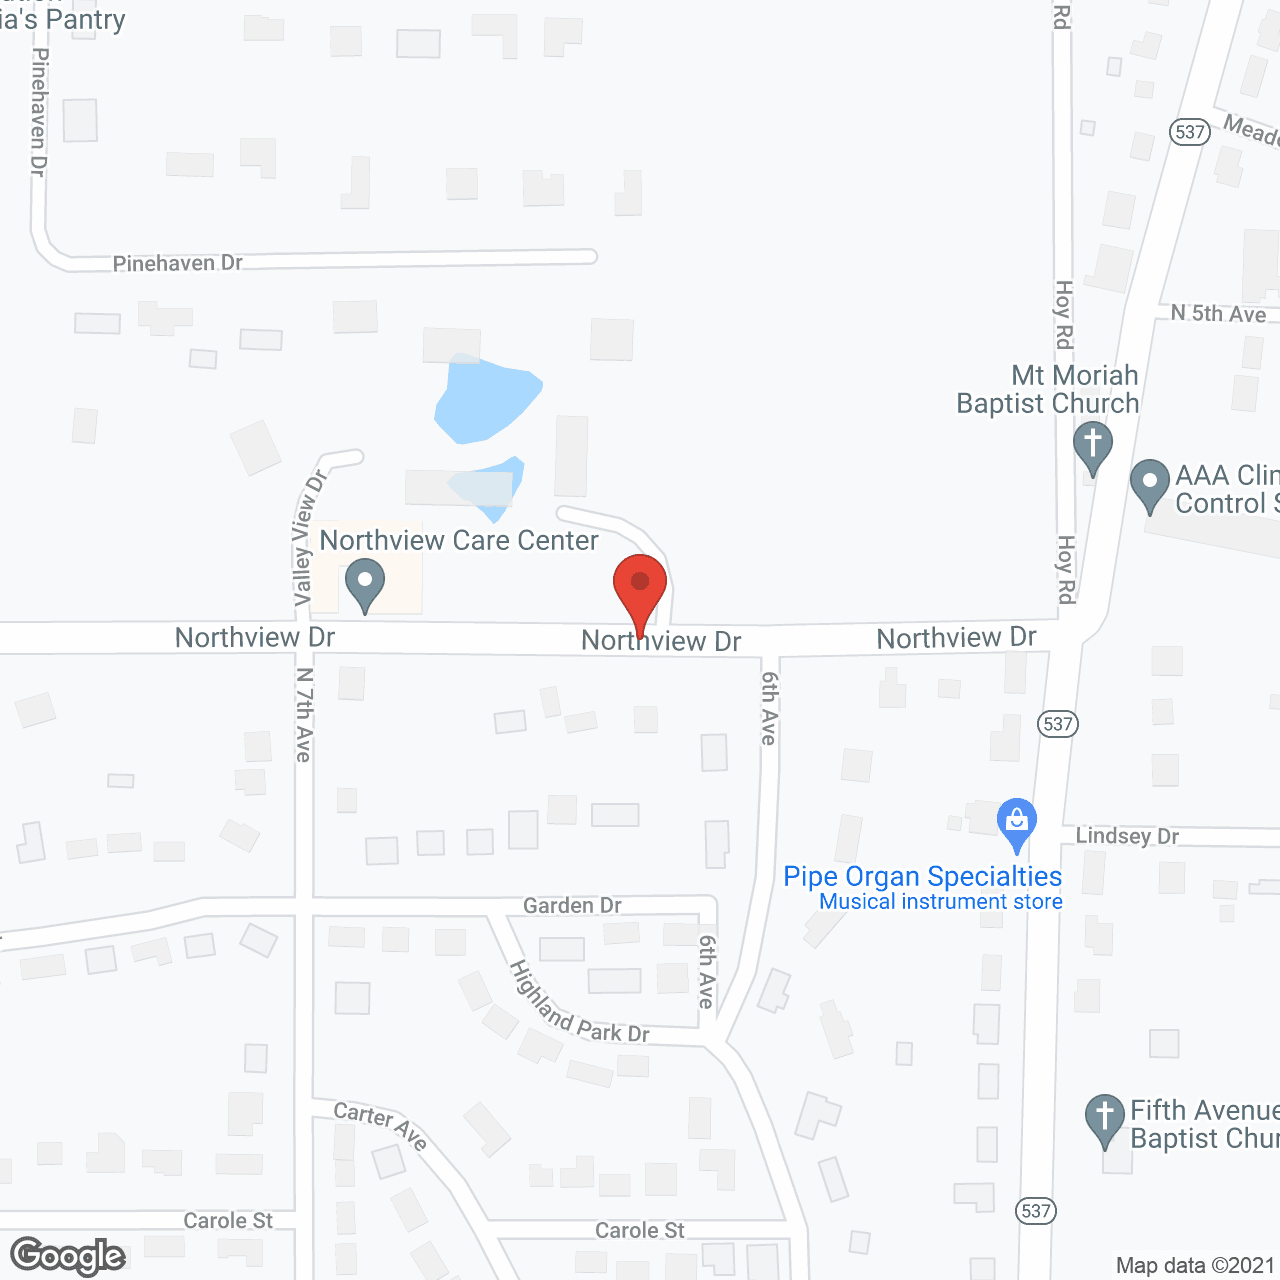 Northview Care Center in google map